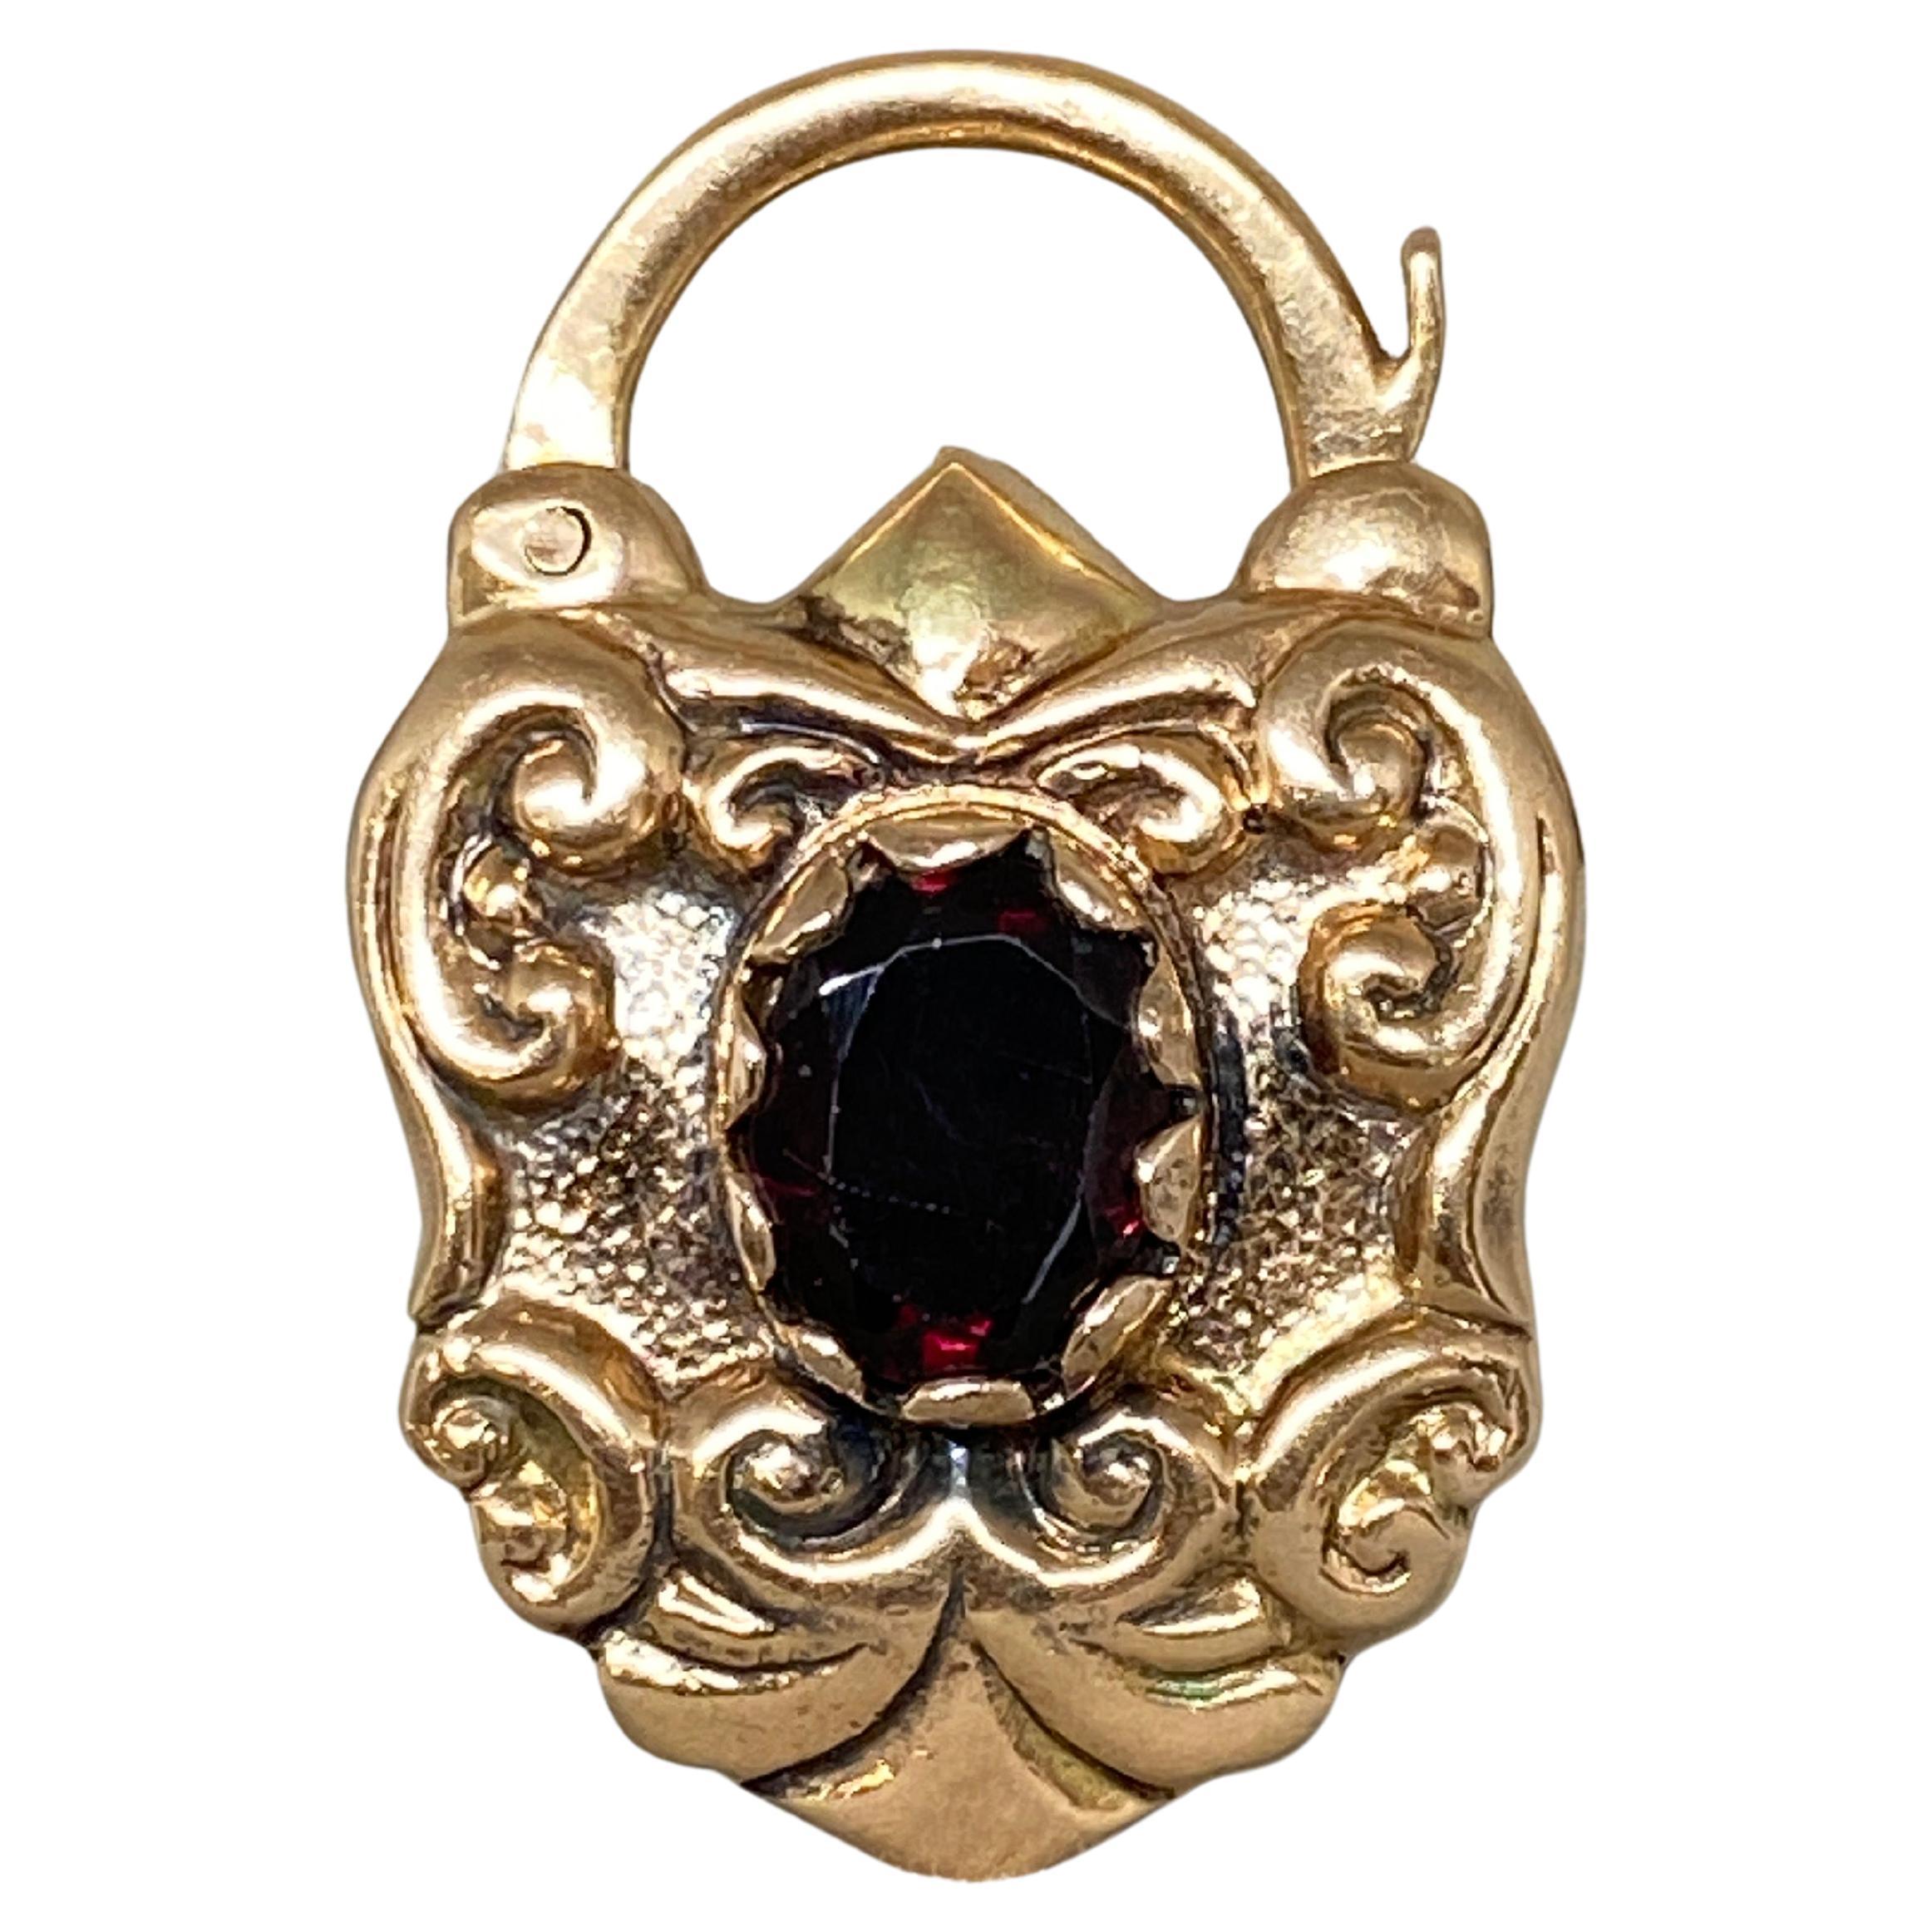 Up for your consideration is this delightful large gem set padlock charm pendant superbly made in 14k rosey-yellow  gold.

From the mid-twentieth century, this padlock charm is ornately decorated with beautiful repousse scrollwork surrounding a